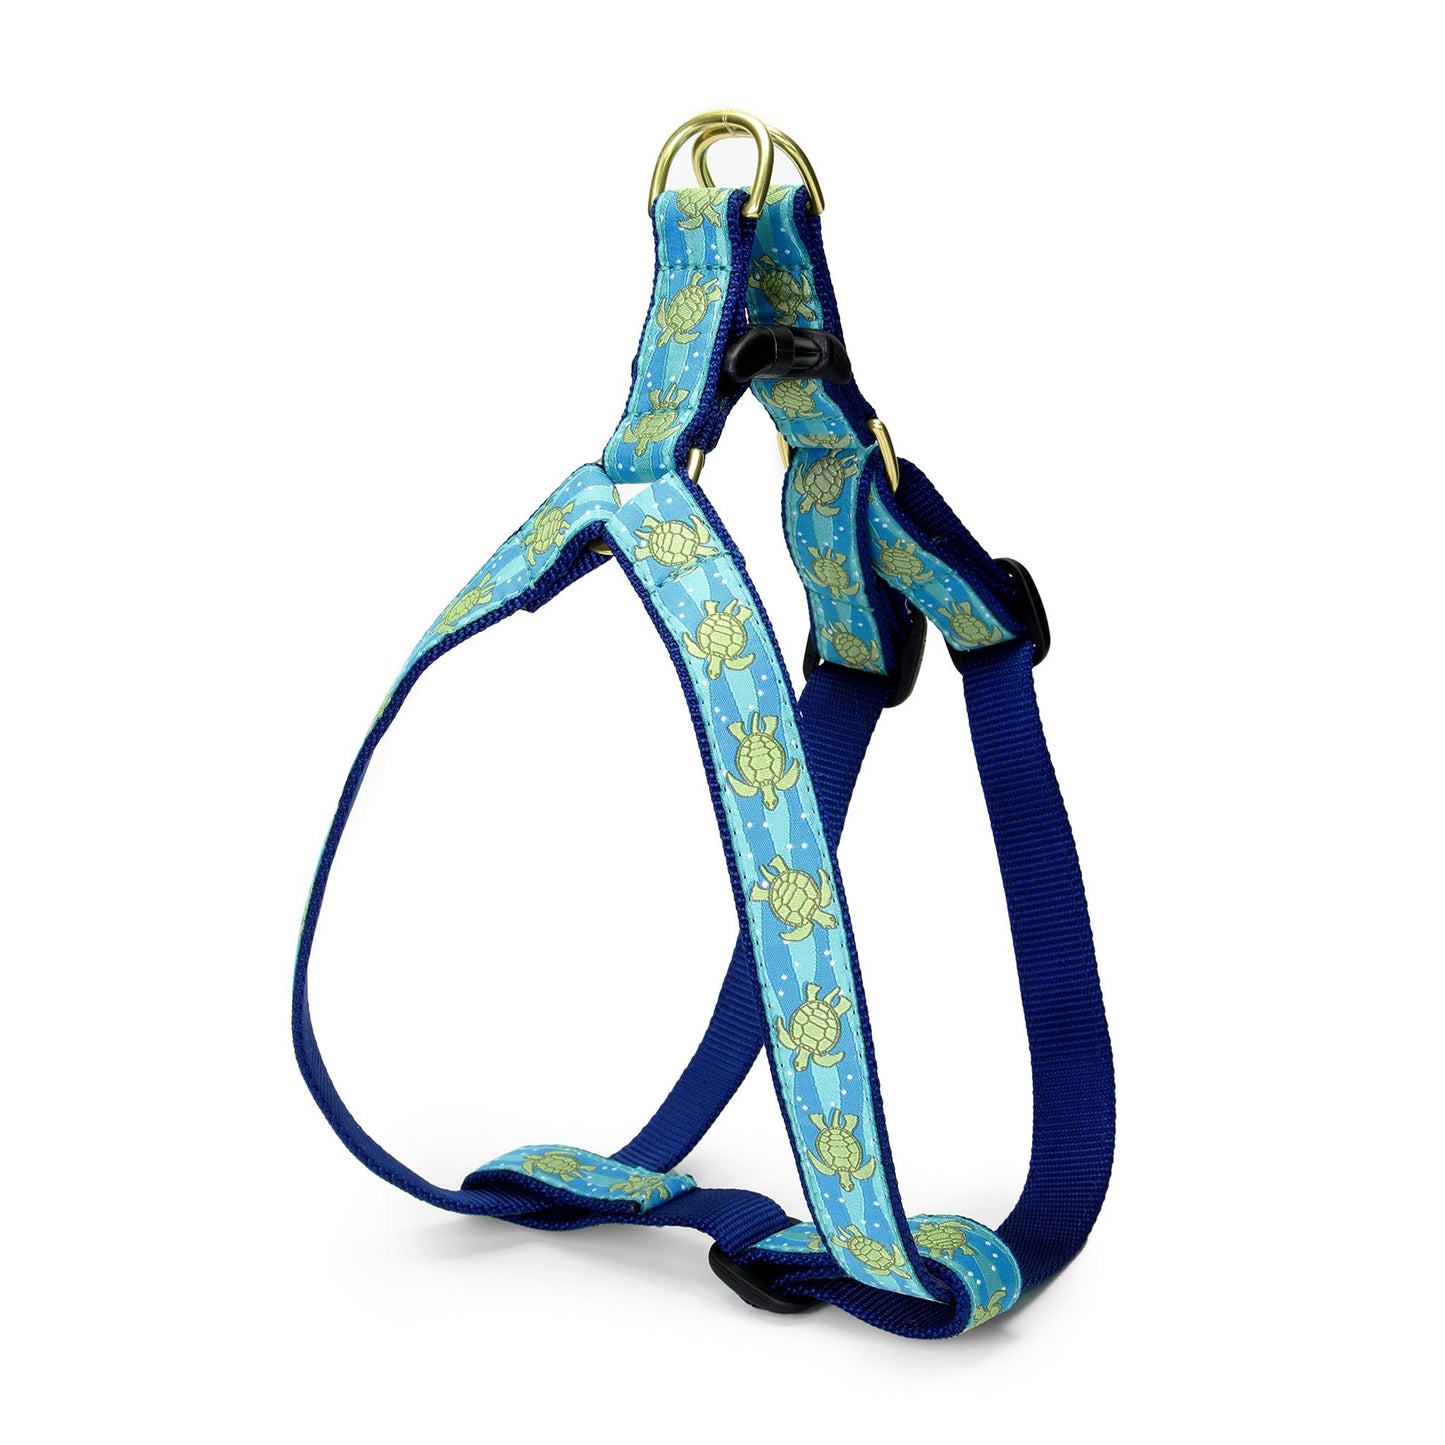 Sea Turtle Dog Harness by Up Country